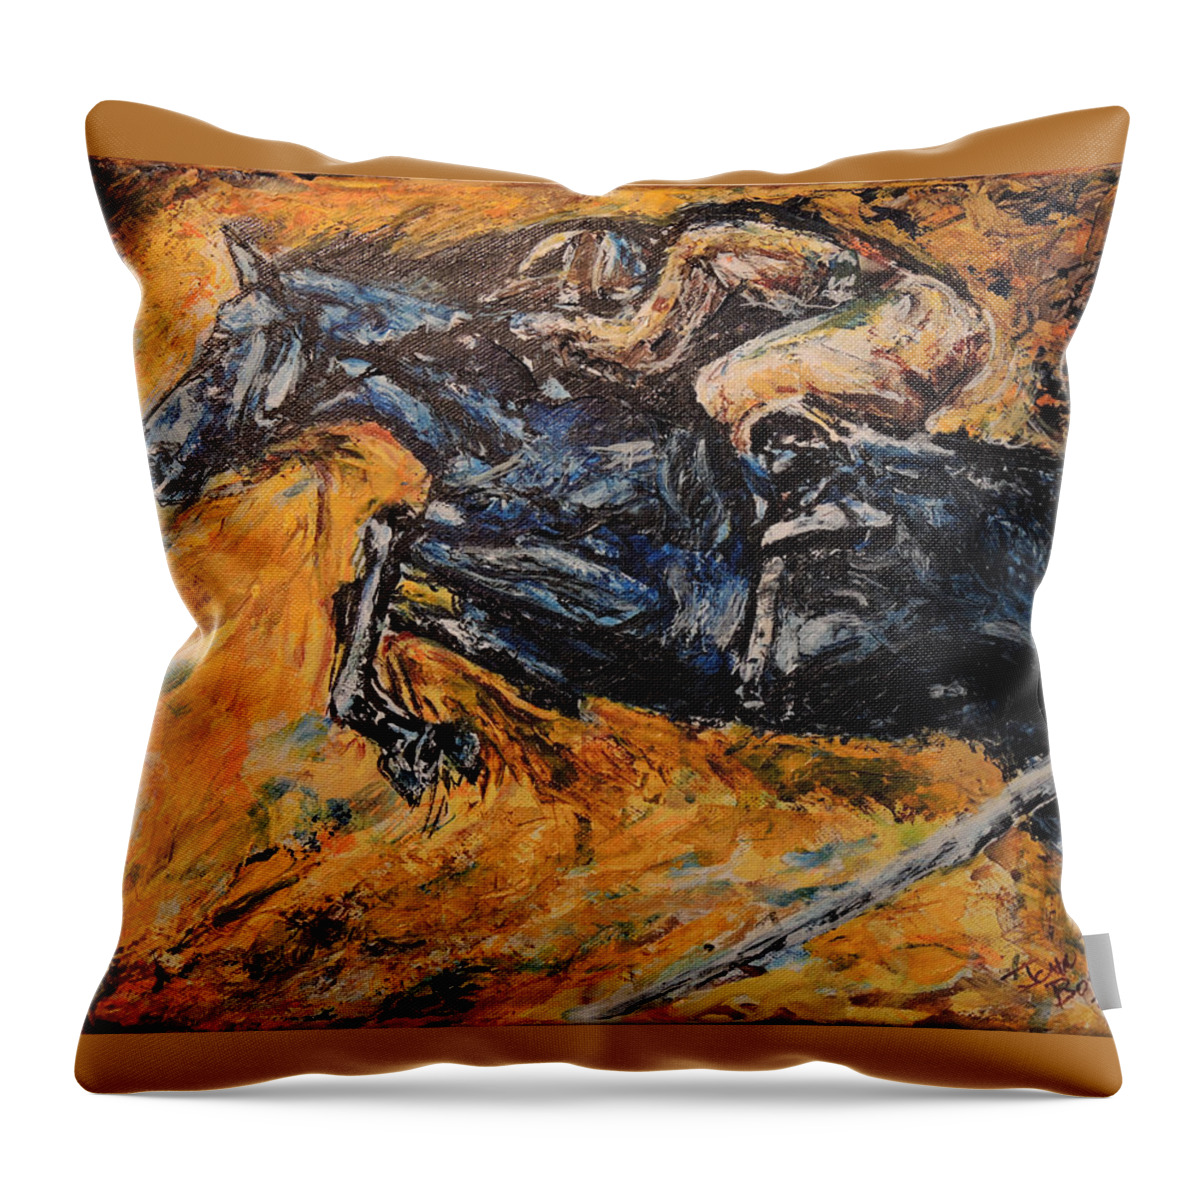 Steeplechase Throw Pillow featuring the painting Steeplechase by John Bohn